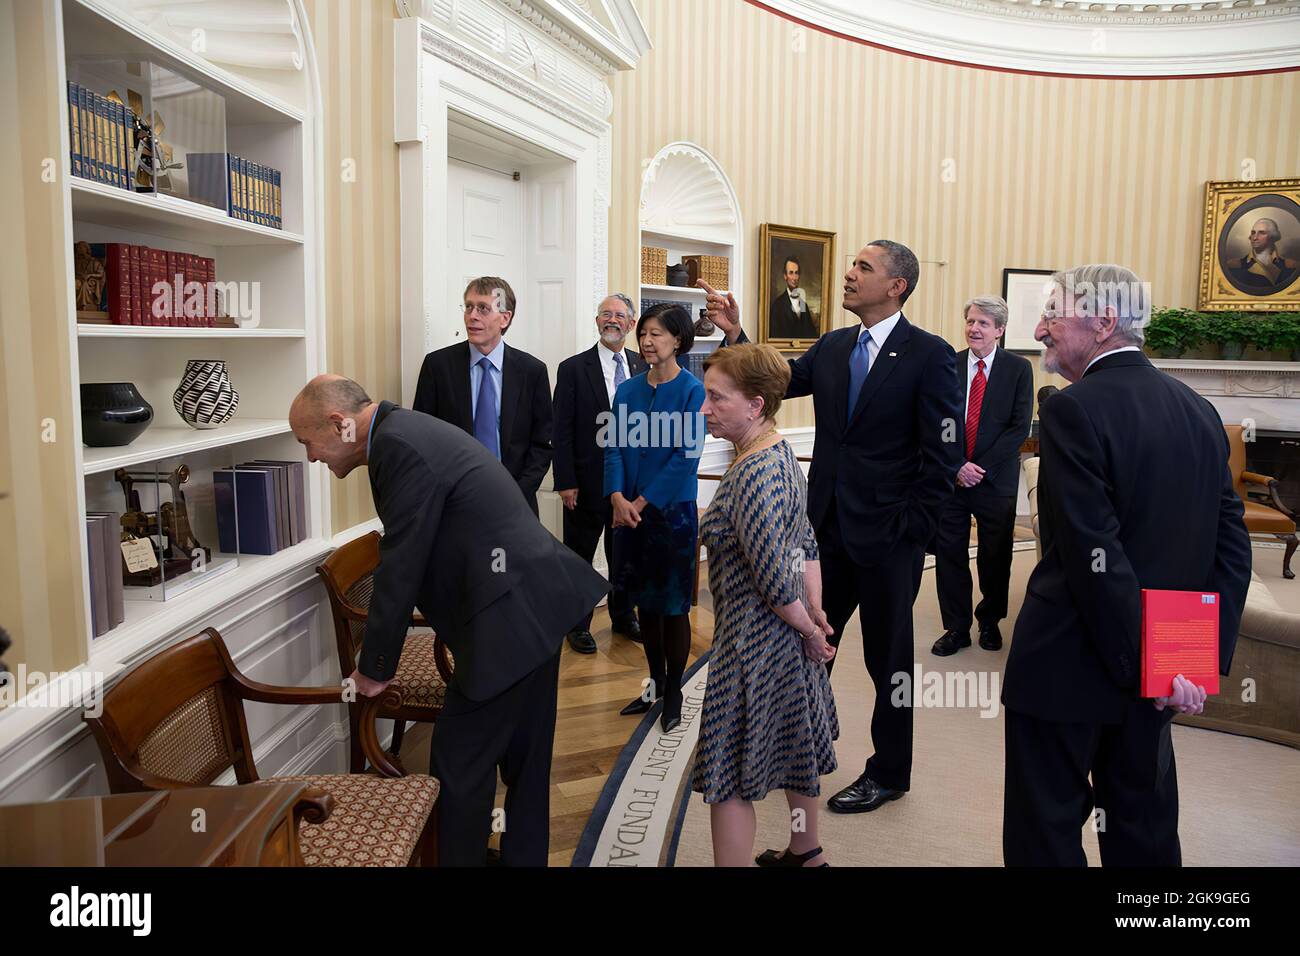 President Barack Obama points out several patent models while meeting with the 2013 American Nobel laureates and their spouses in the Oval Office, Nov. 19, 2013. (Official White House Photo by Pete Souza) This official White House photograph is being made available only for publication by news organizations and/or for personal use printing by the subject(s) of the photograph. The photograph may not be manipulated in any way and may not be used in commercial or political materials, advertisements, emails, products, promotions that in any way suggests approval or endorsement of the President, th Stock Photo